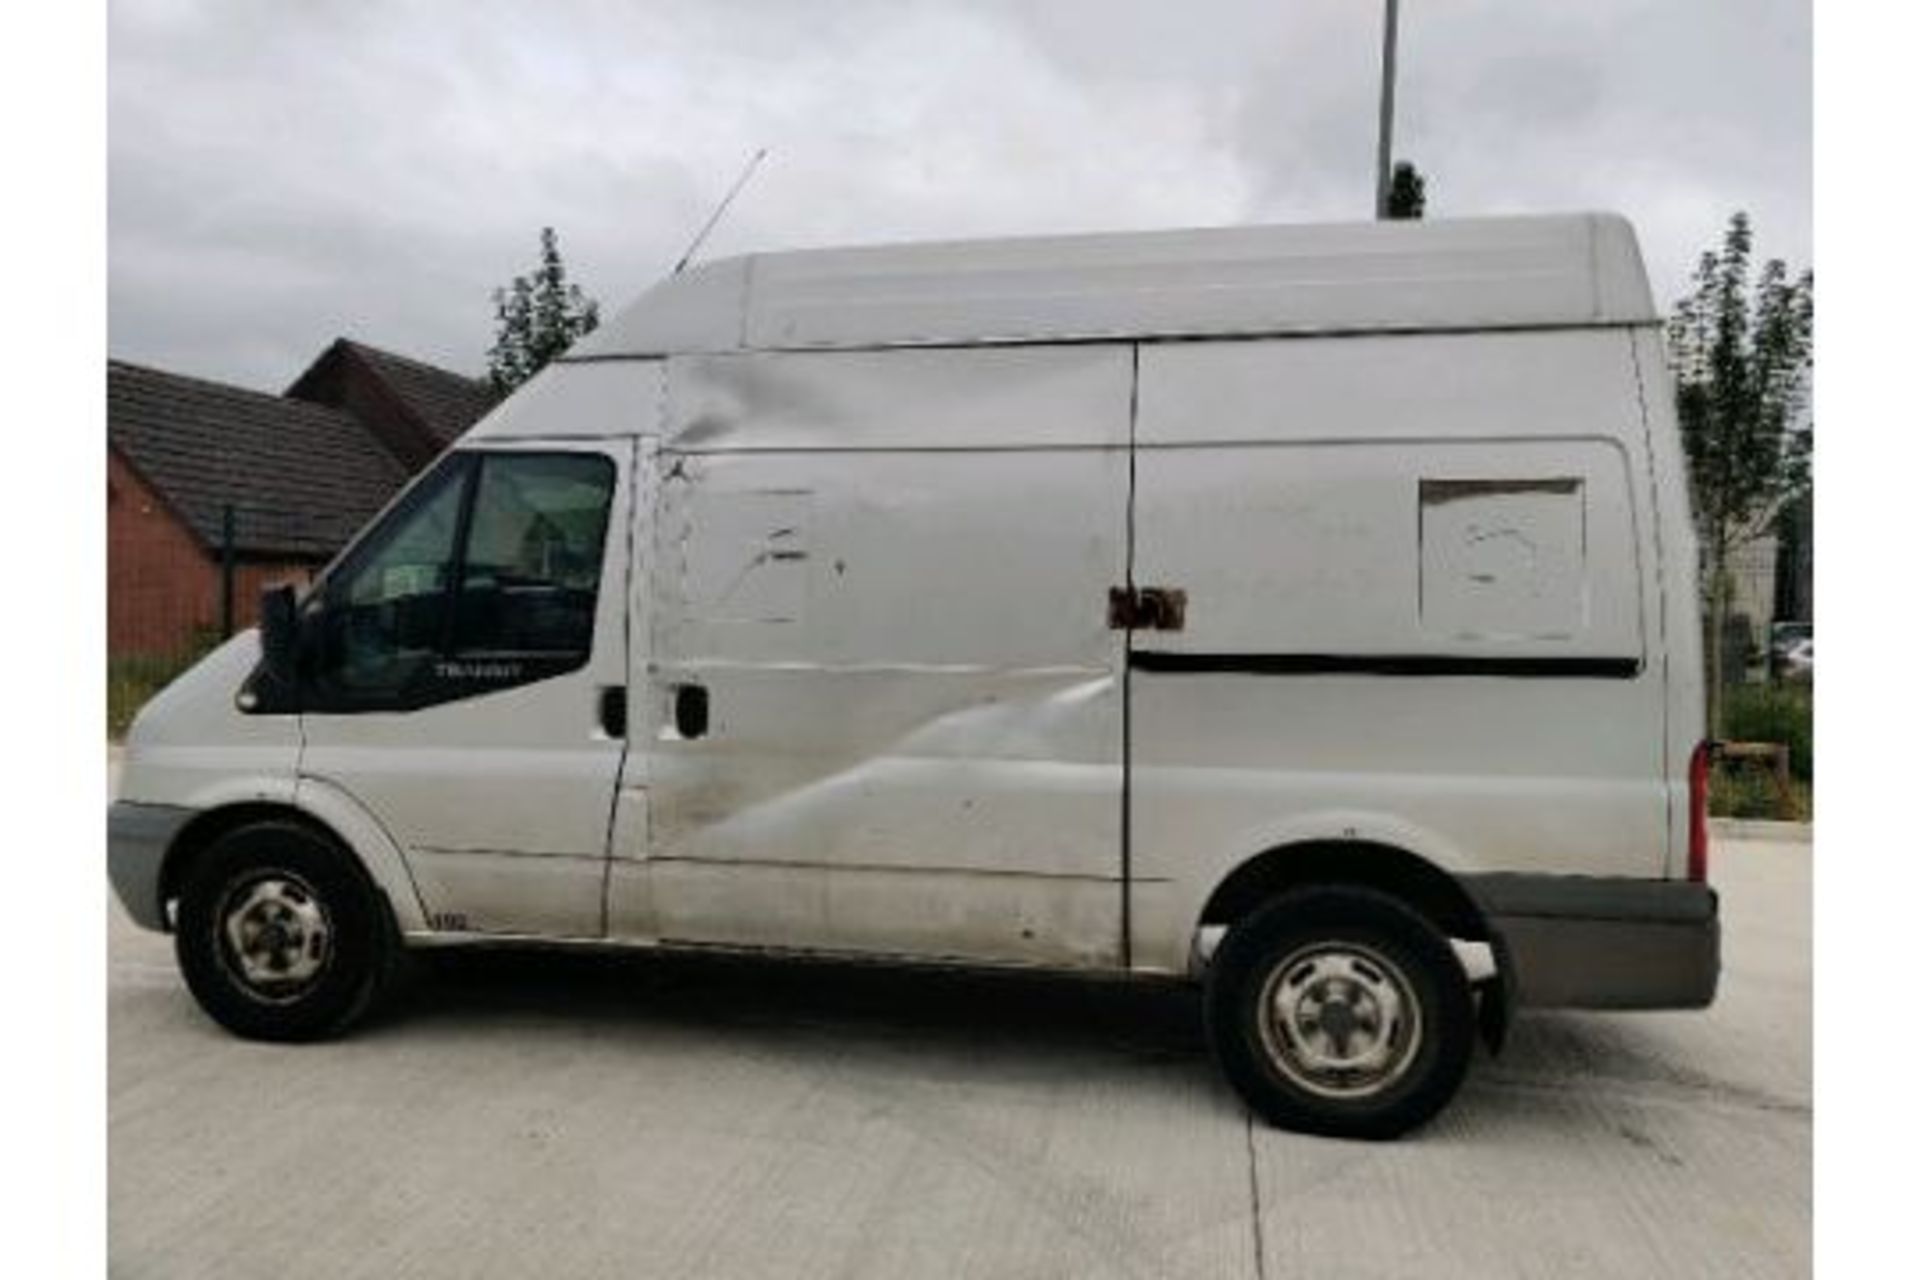 ENTRY DIRECT FROM LOCAL AUTHORITY Ford Transit 115 T350M FWD, Reg: YR59AMU - Image 3 of 29